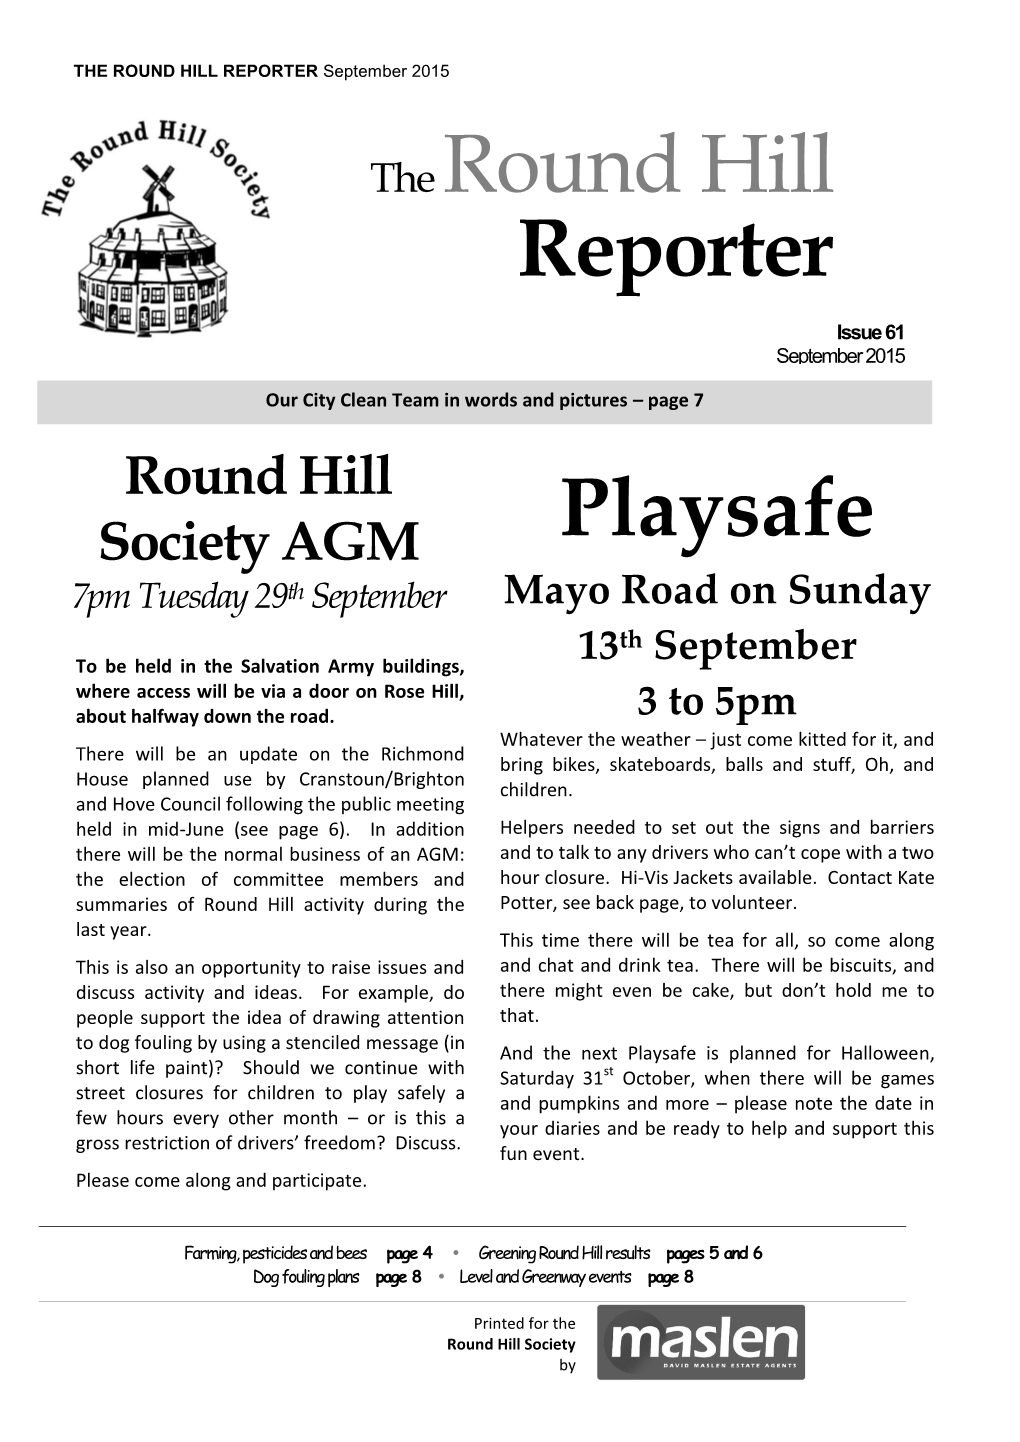 The Round Hill Reporter Playsafe